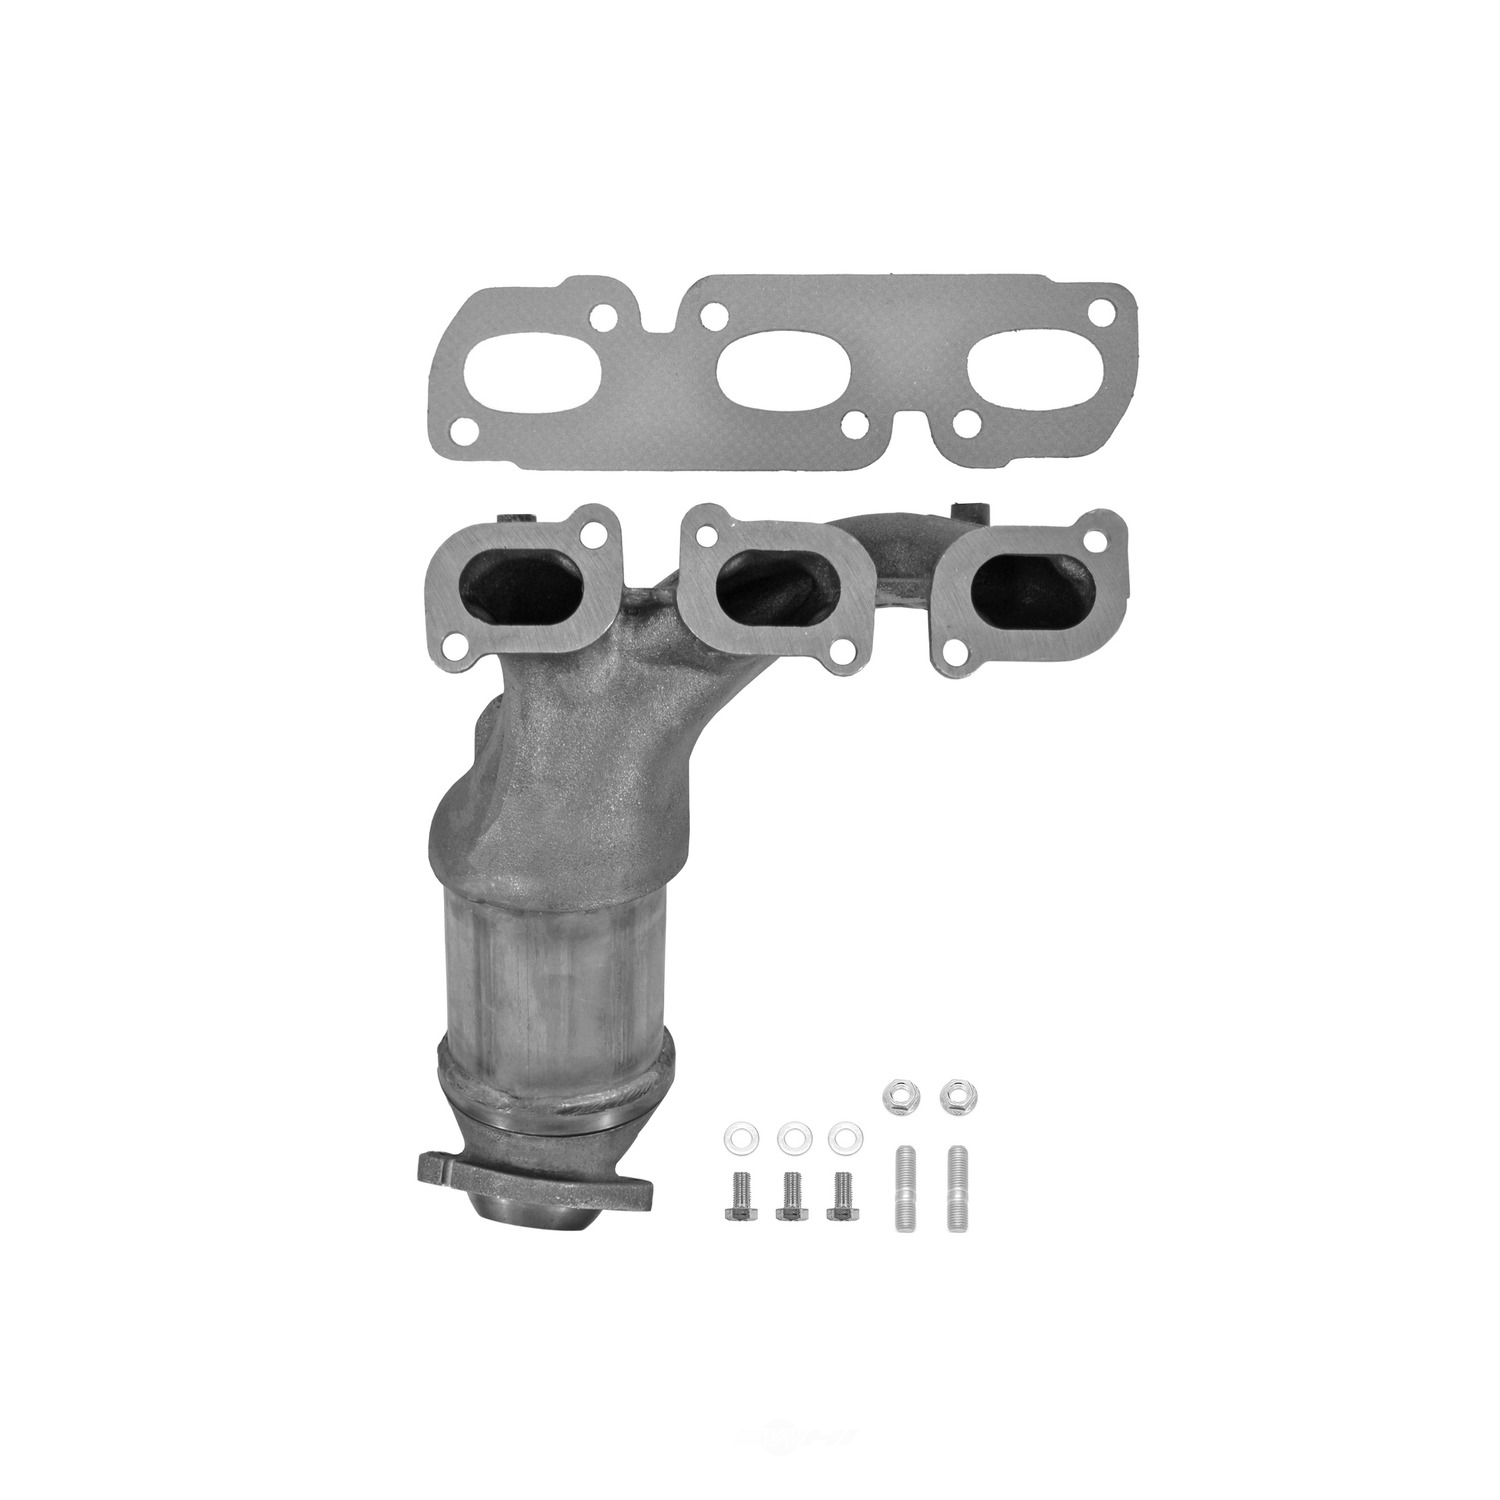 AP EXHAUST FEDERAL CONVERTER - Direct Fit Converter w/ Manifold - APG 641391